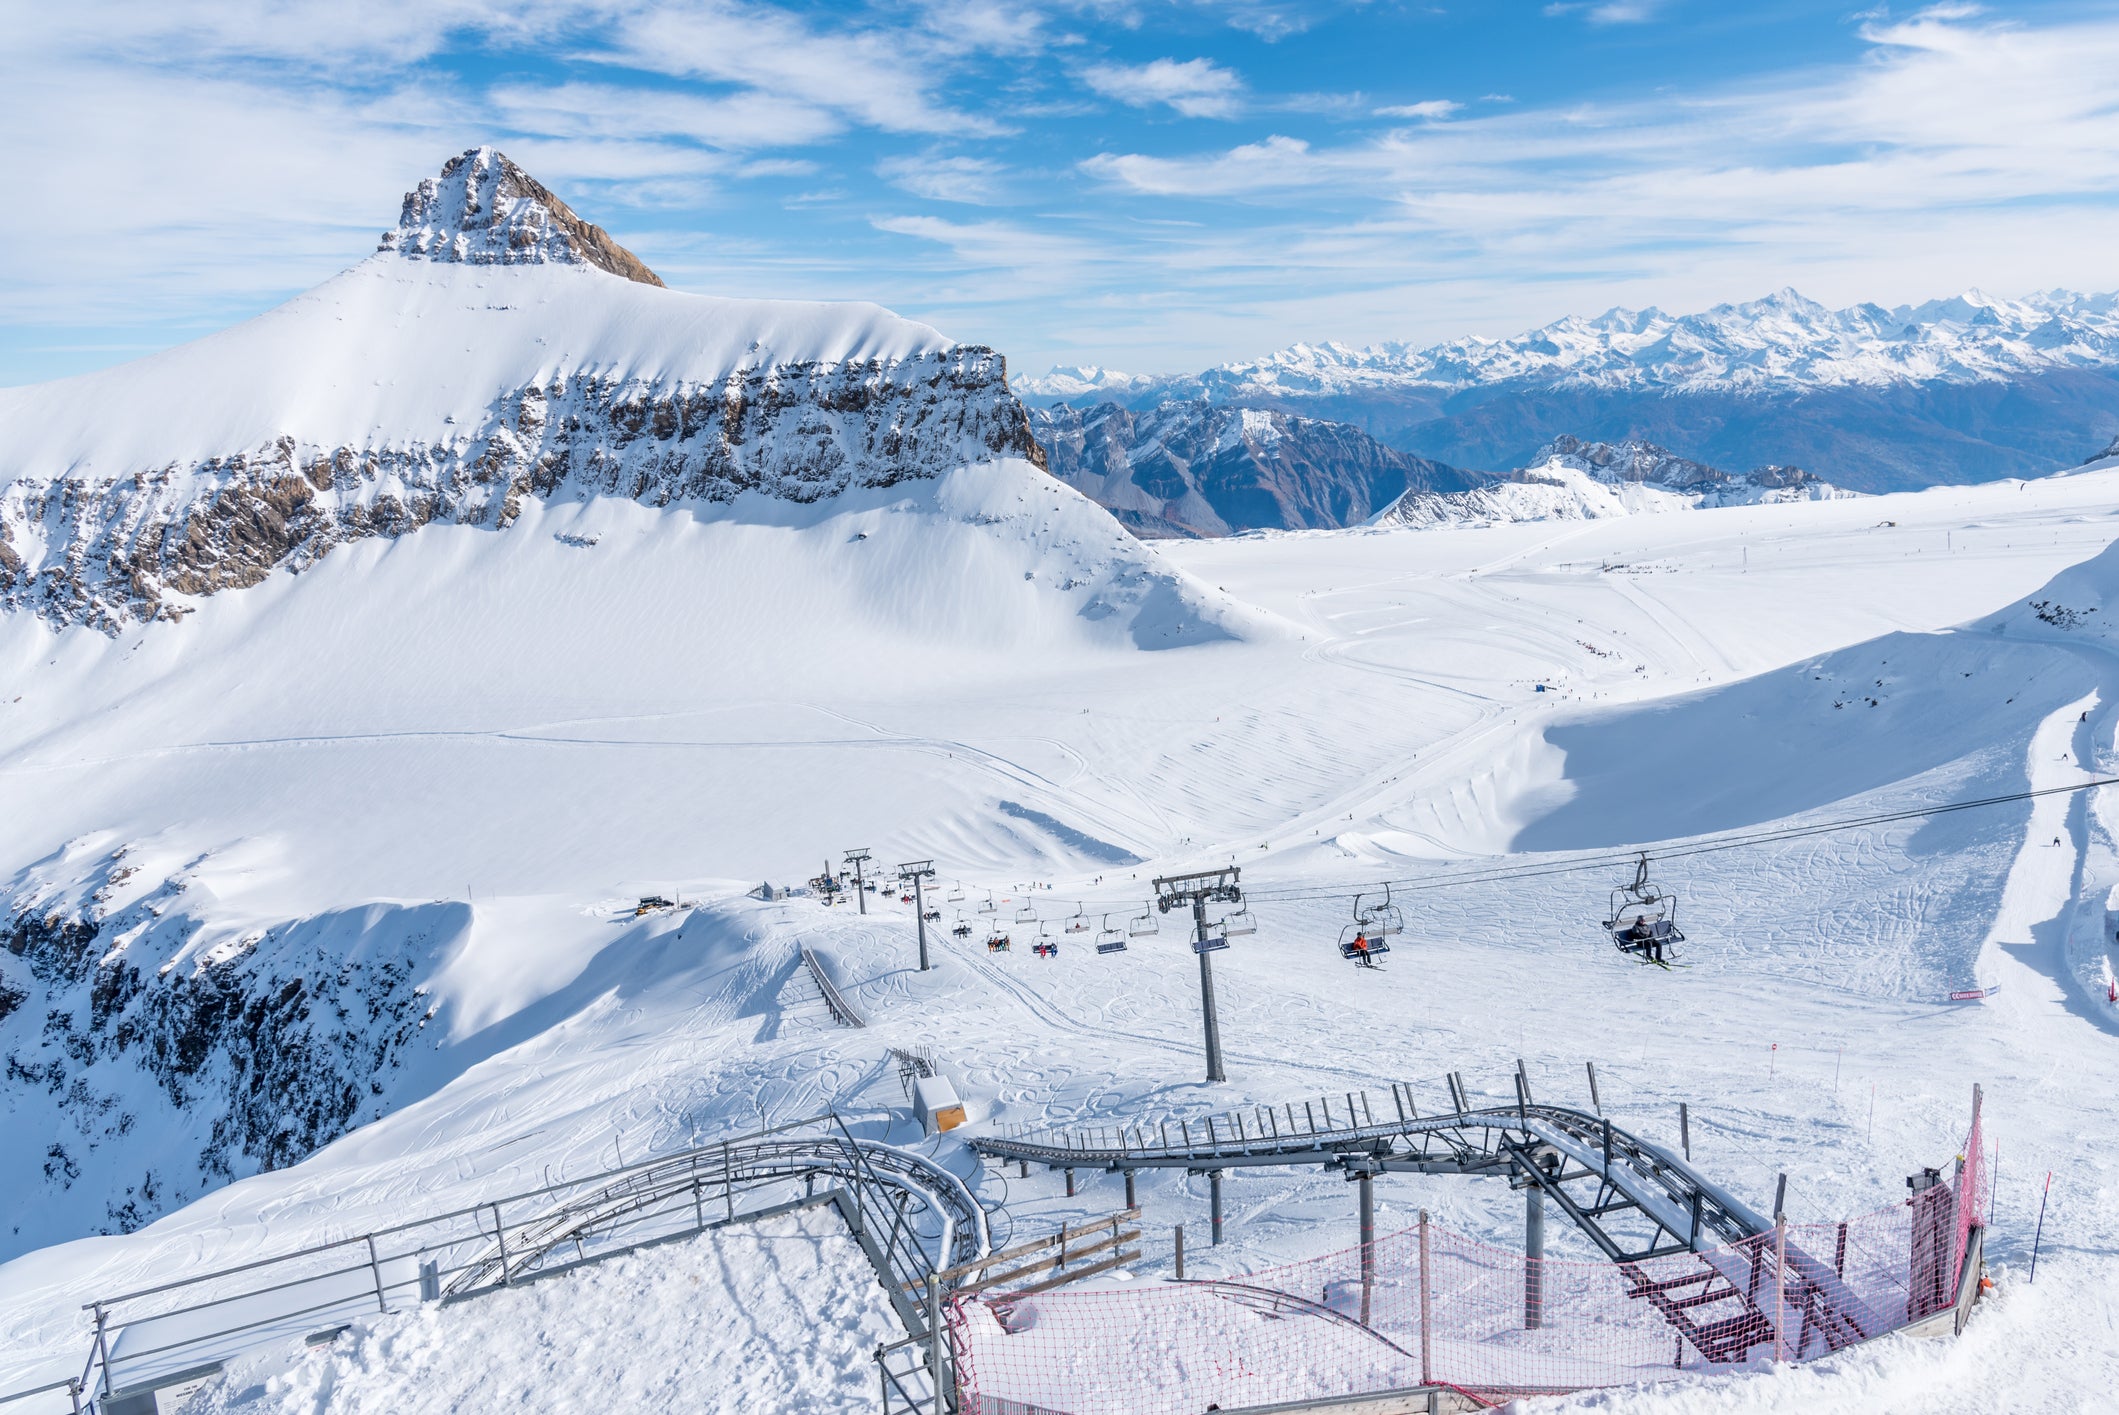 Seasoned skiers can cruise the Swiss mountain slopes solo and socialise at lively après haunts